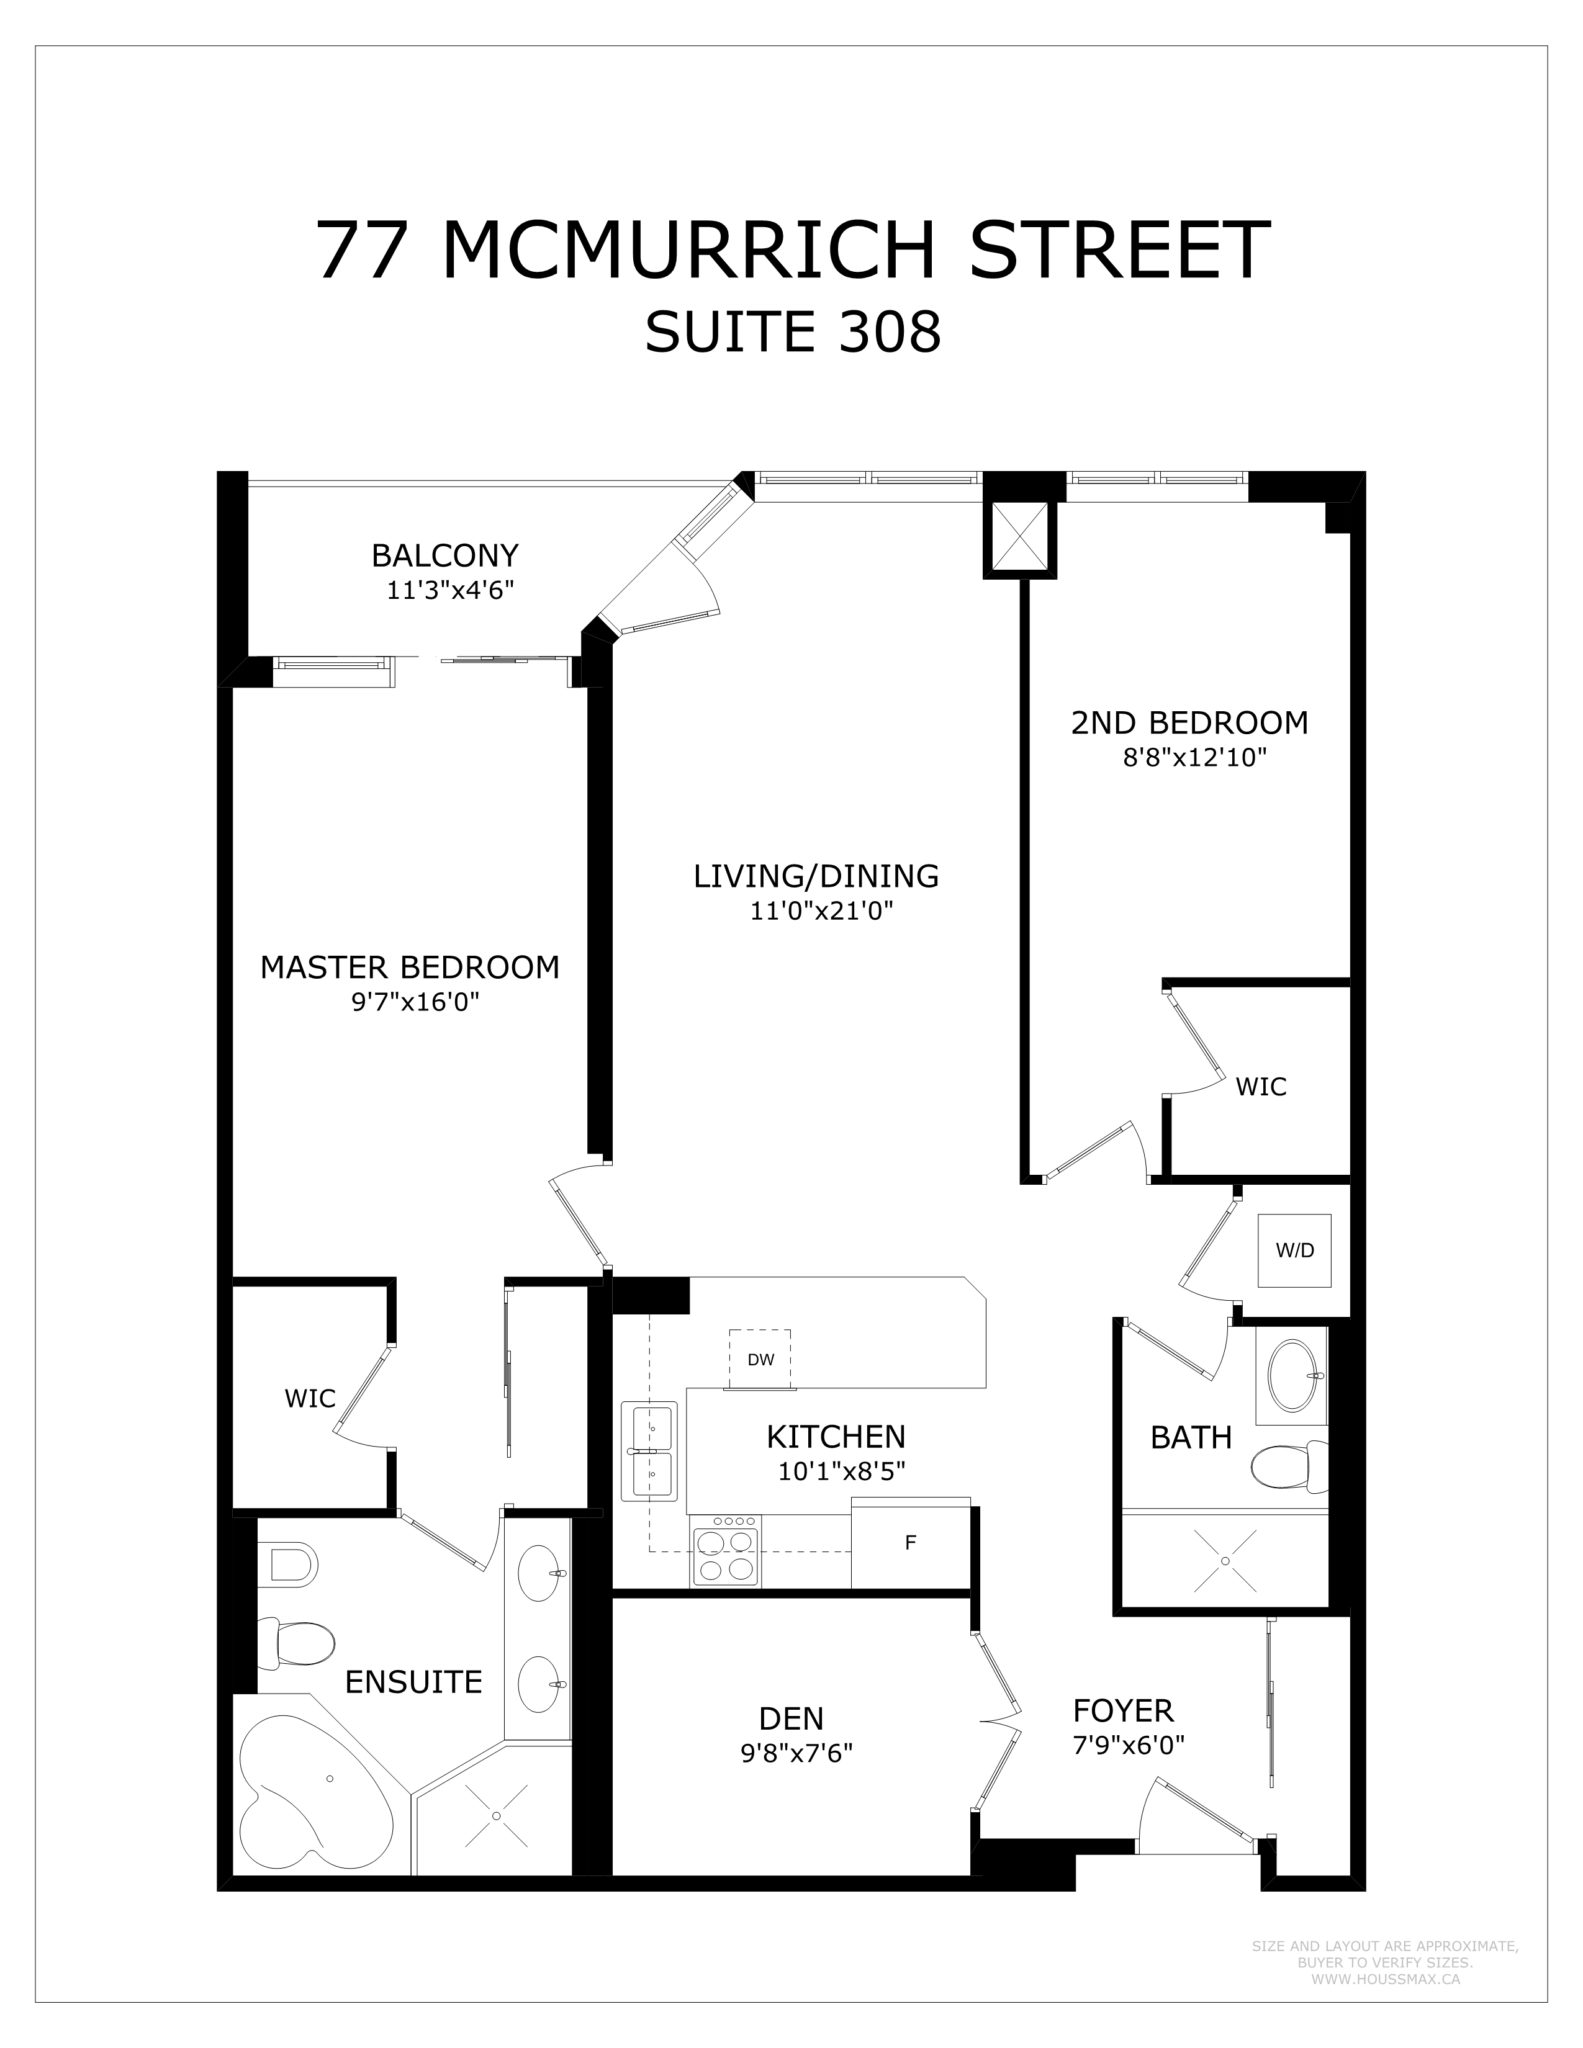 Condo floor plans for 77 McMurrich St Unit 308 in Yorkville.